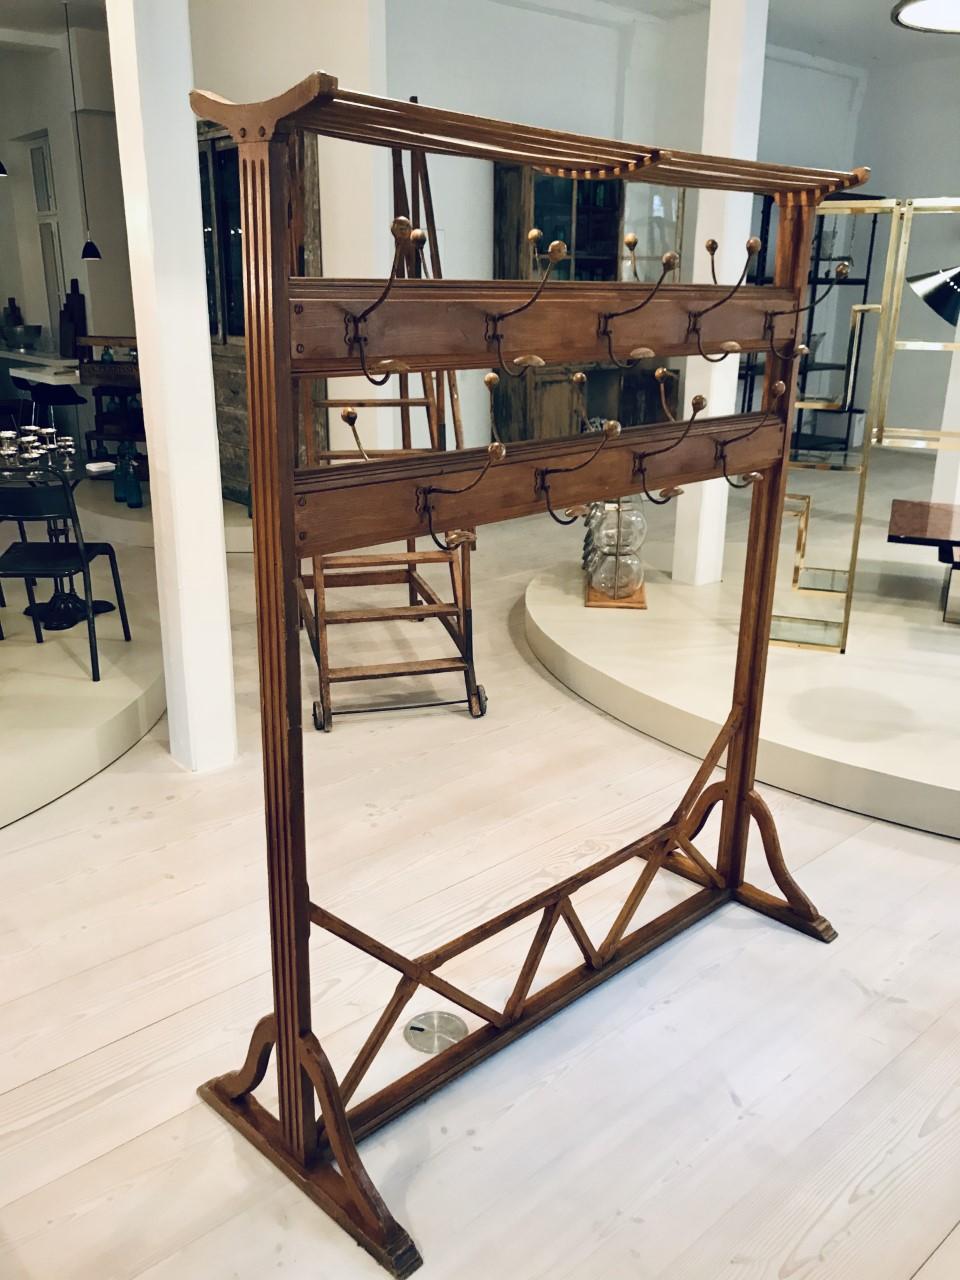 Elegant antique freestanding wardrobe stand / clothes rack, from circa 1890s, France. Originally from a variety / pantomine theatre in Lyon. Handsome carpentry work and a quality stable. Painted in a beautiful warm burnt Sienna / brown hue. This